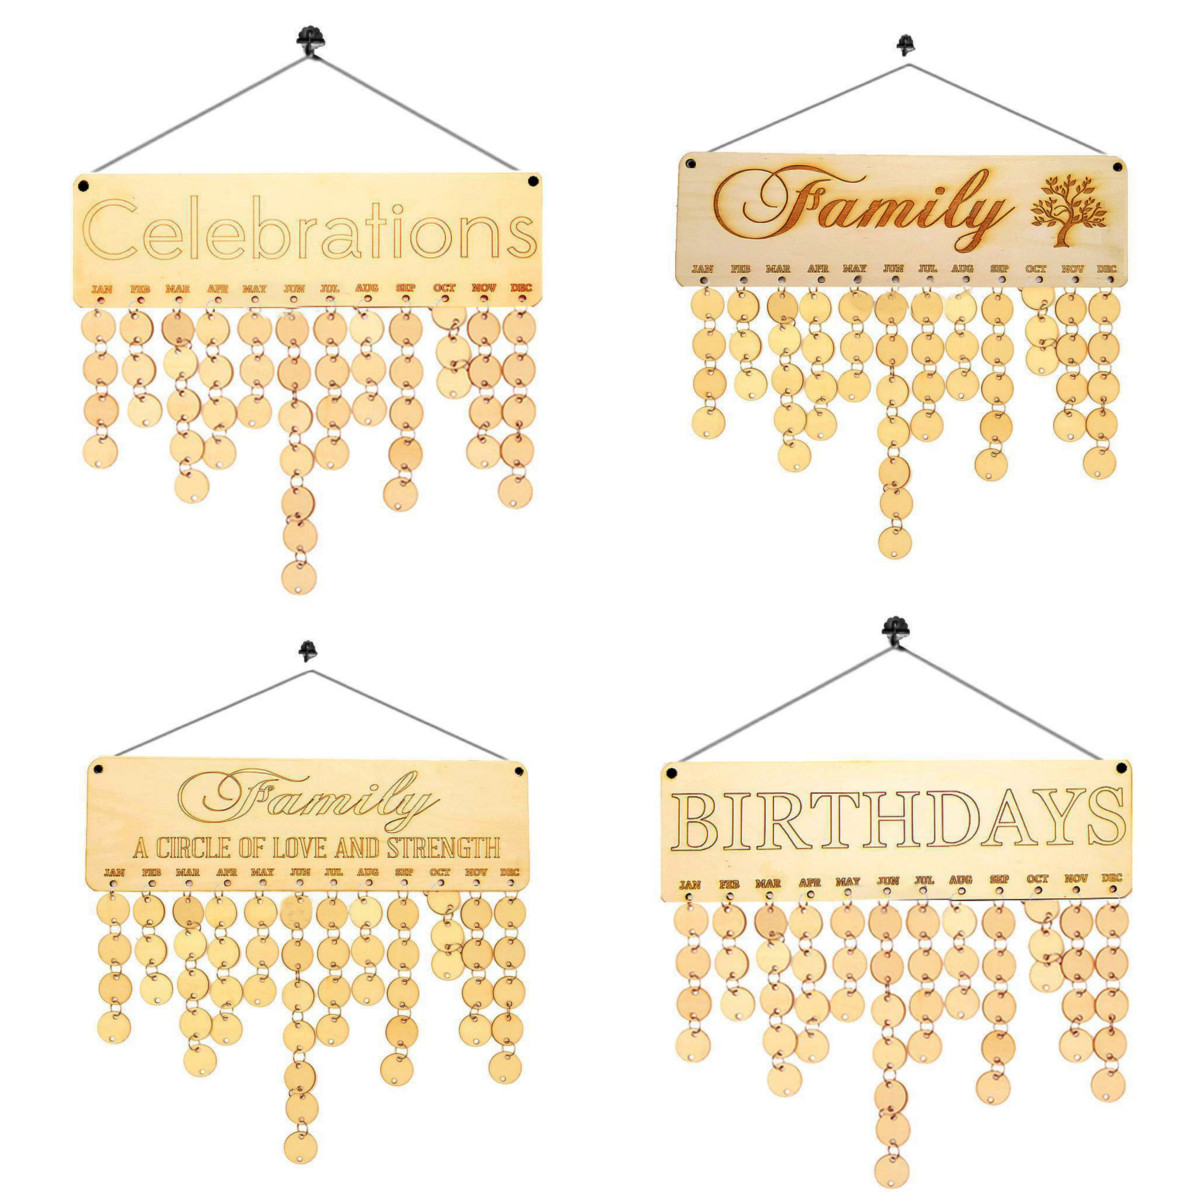 Wood-Birthday-Reminder-Wood-Plaque-Board-Sign-Family-DIY-Calendar-Home-Decorations-1210529-2